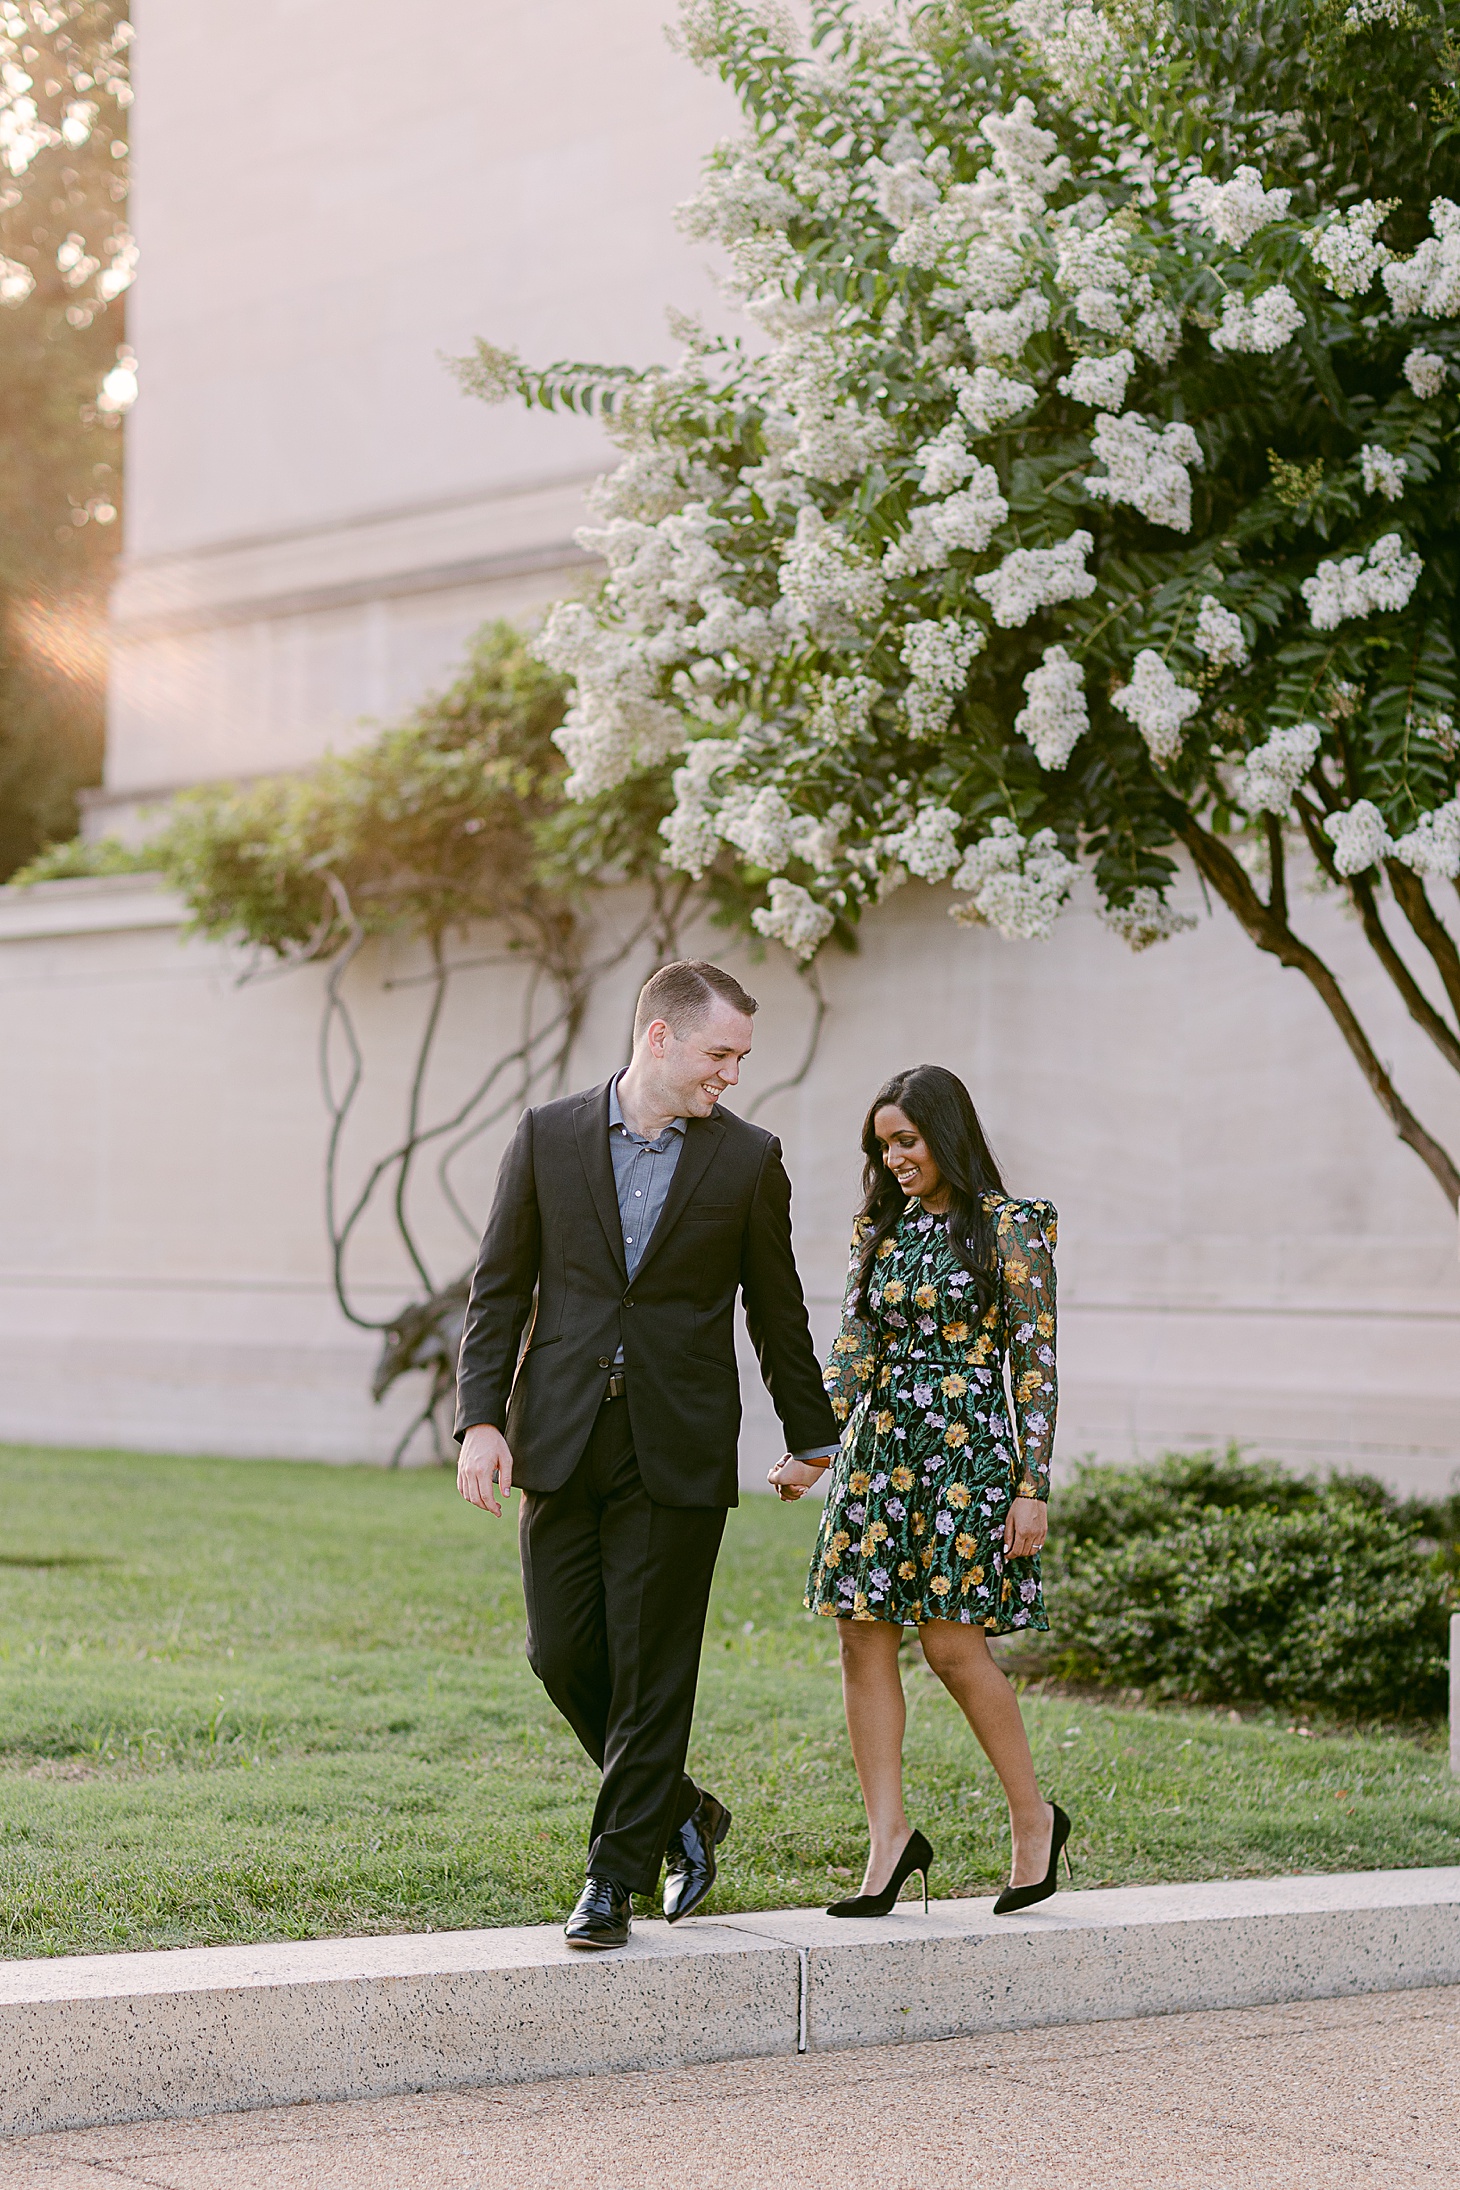 Southeast Asian bride engagement portraits at National Gallery of Art by Sarah Bradshaw Photography